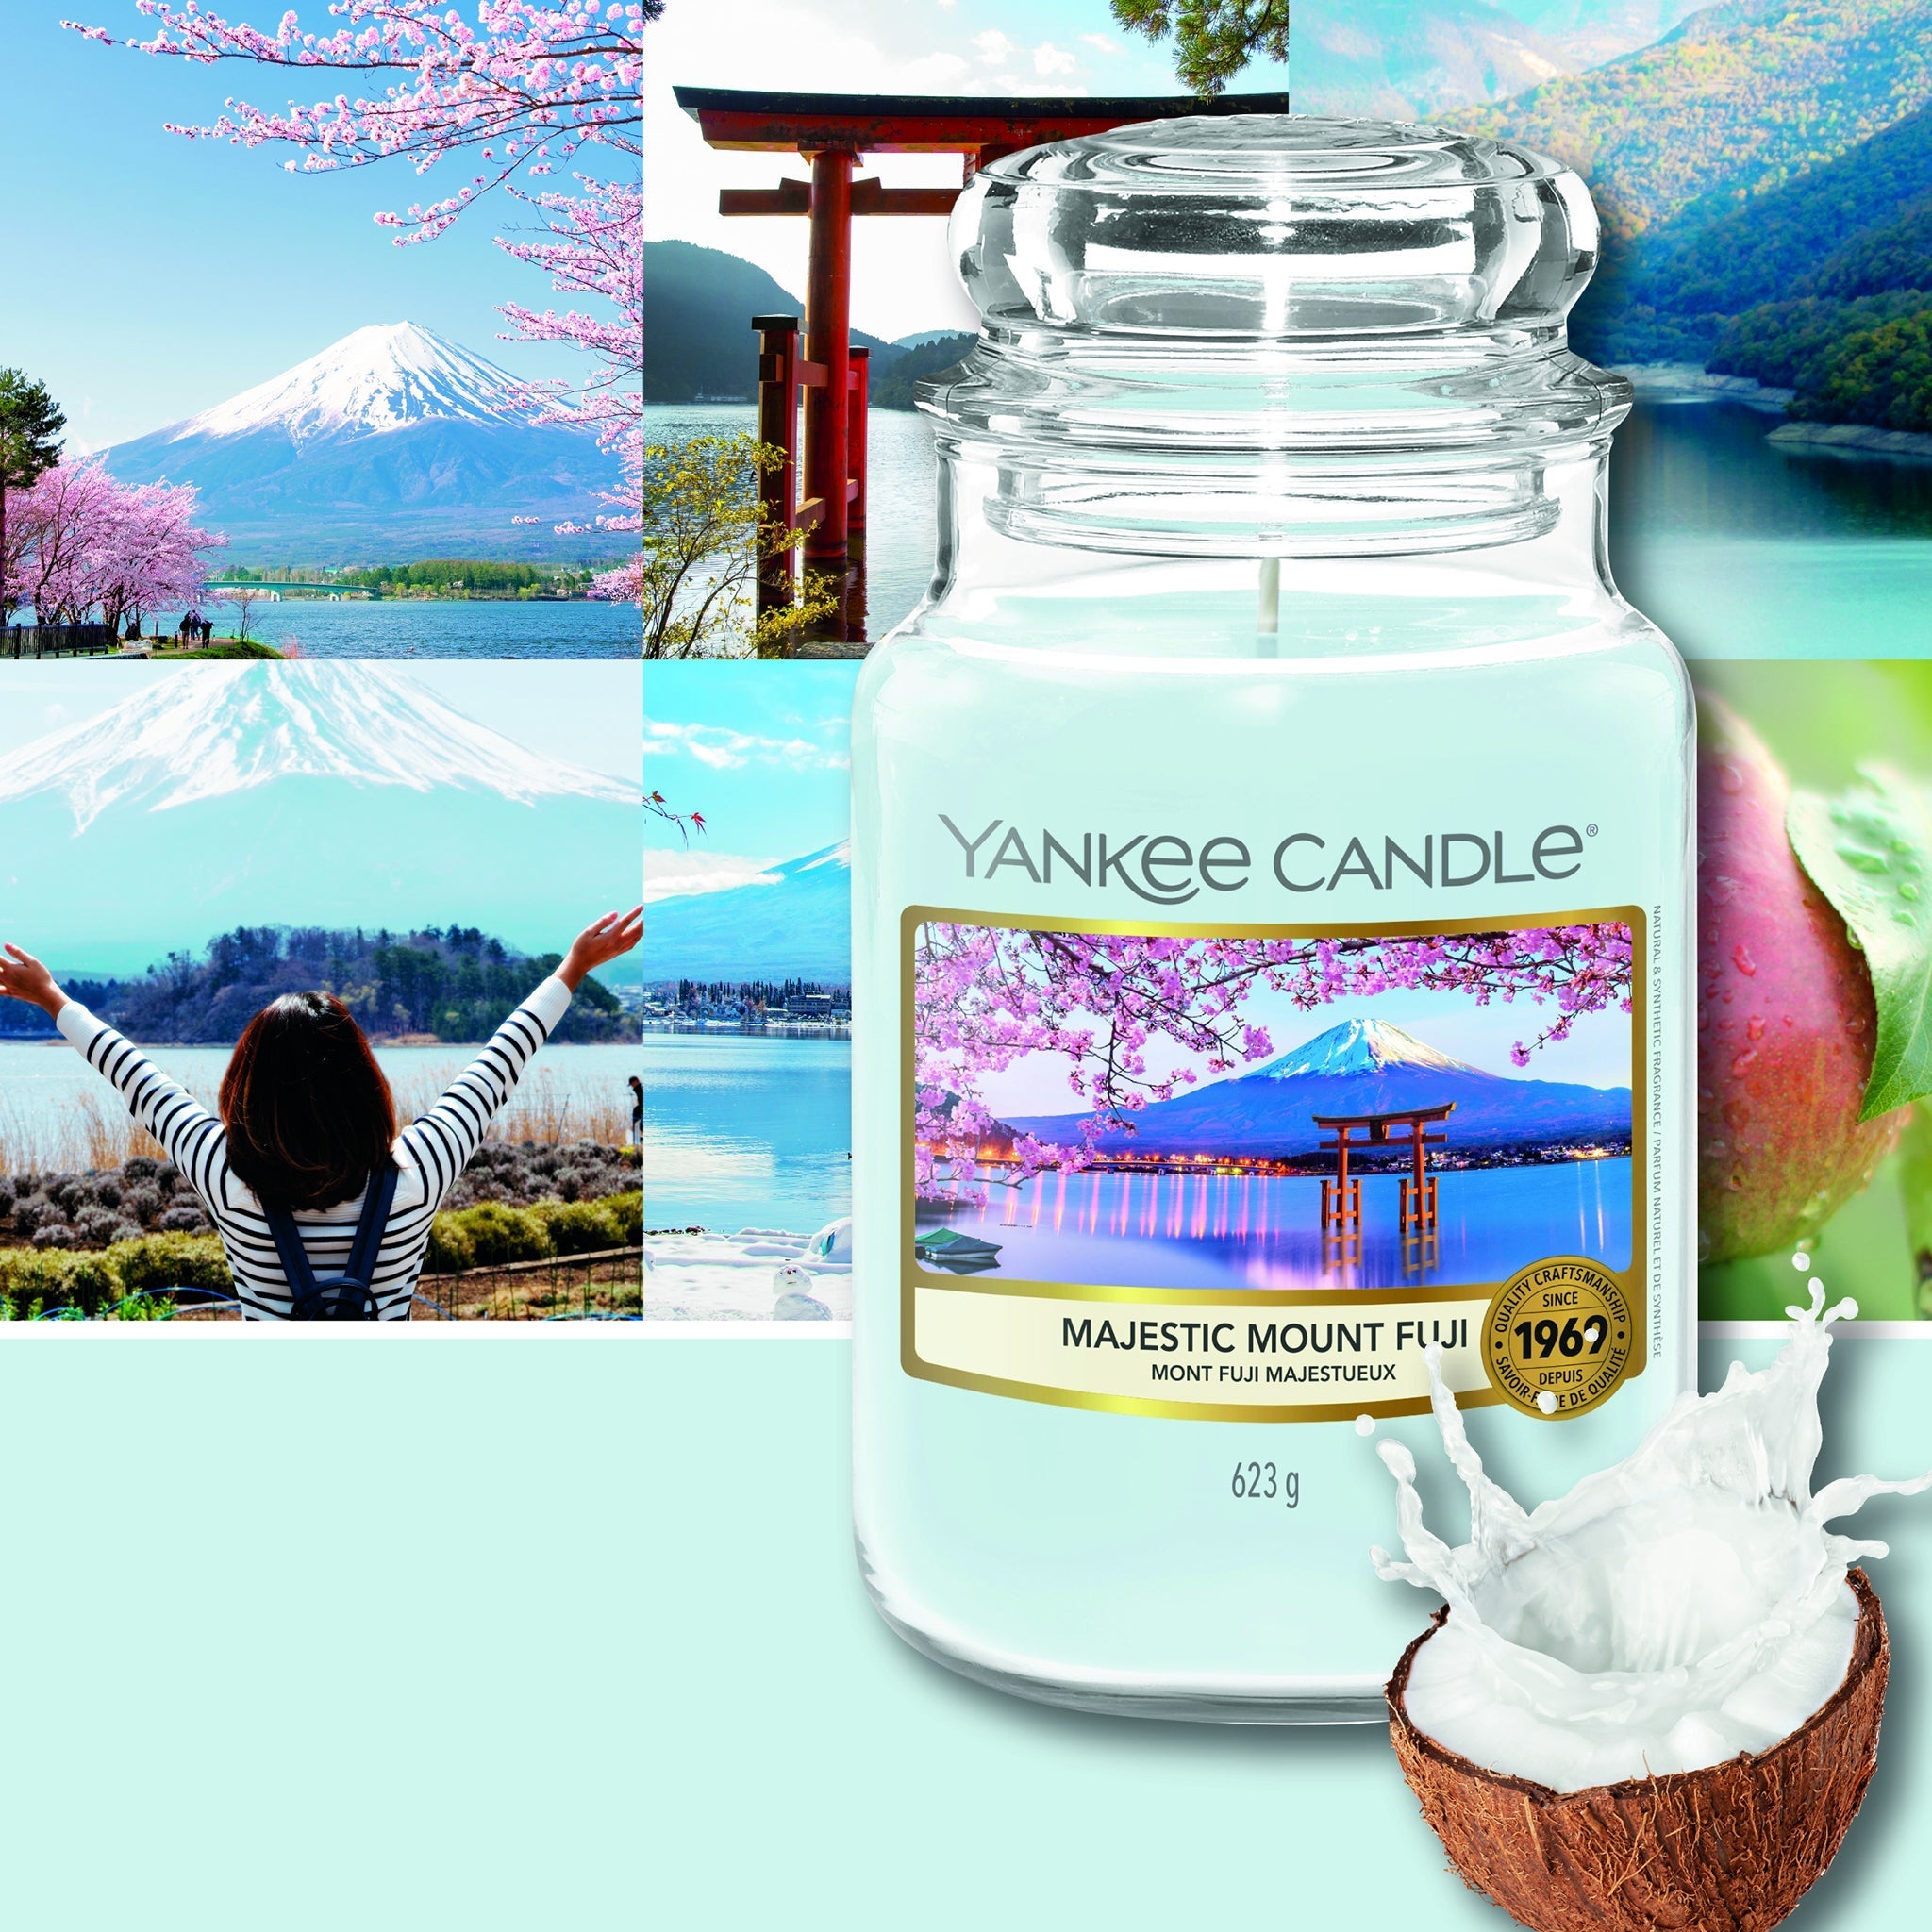 Yankee Candle Original Large Jar Scented Candle, Coconut Beach